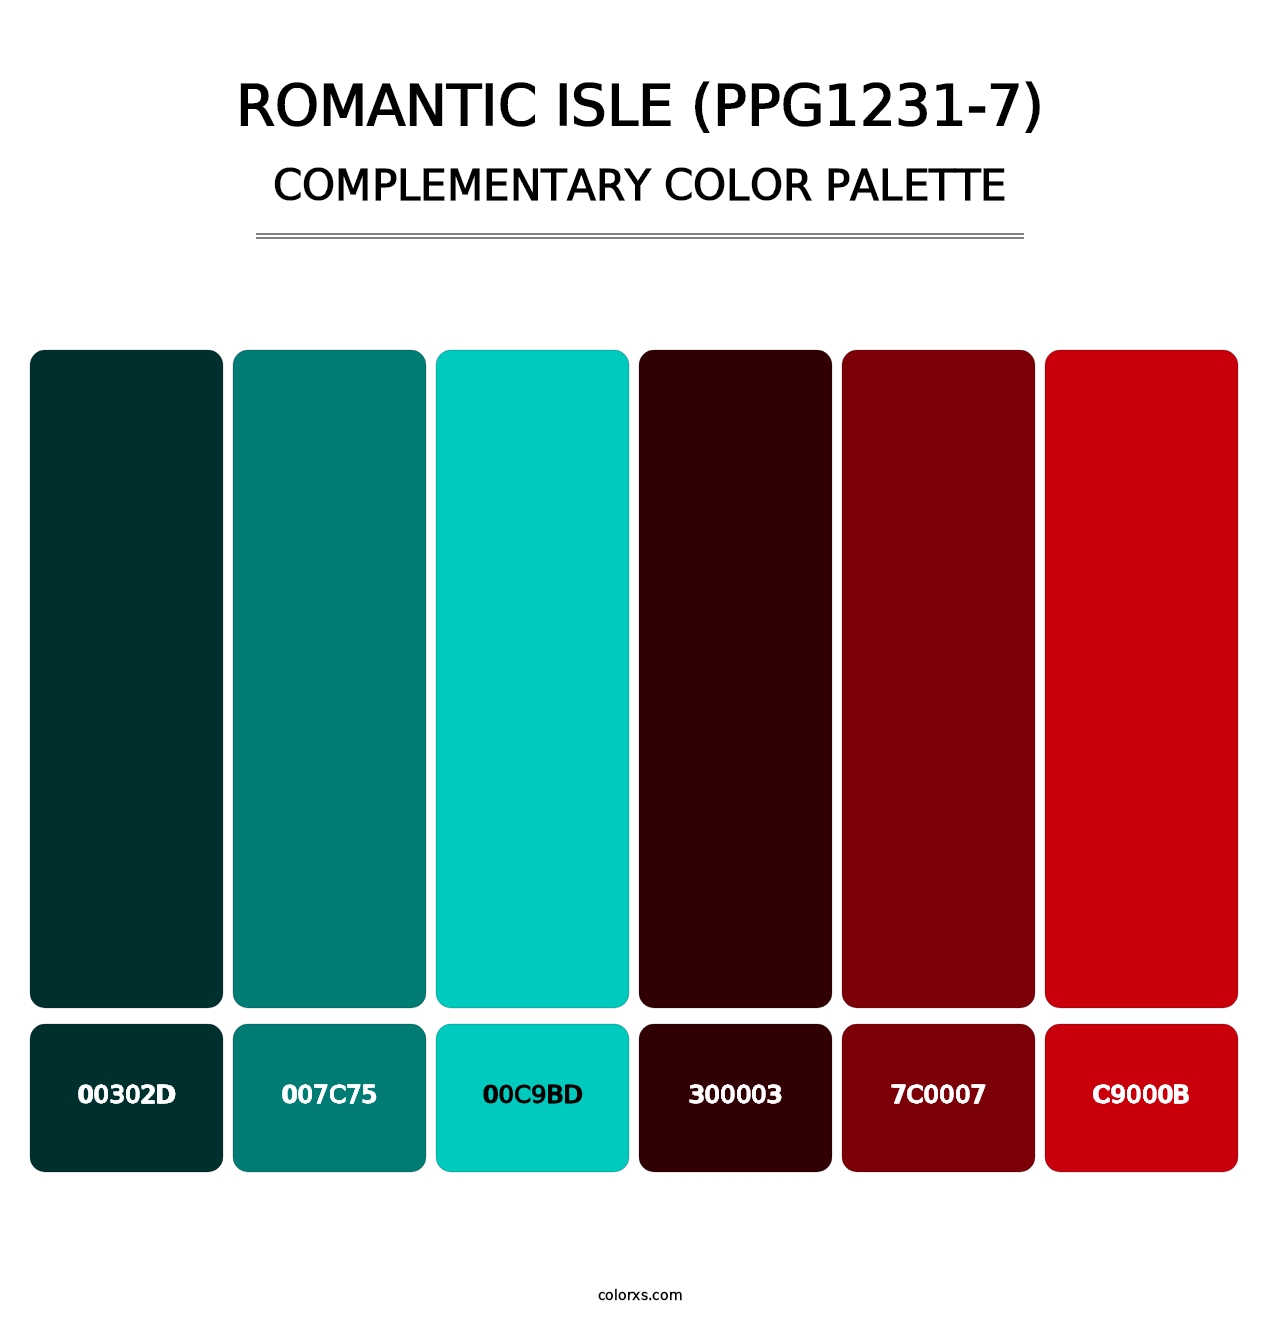 Romantic Isle (PPG1231-7) - Complementary Color Palette